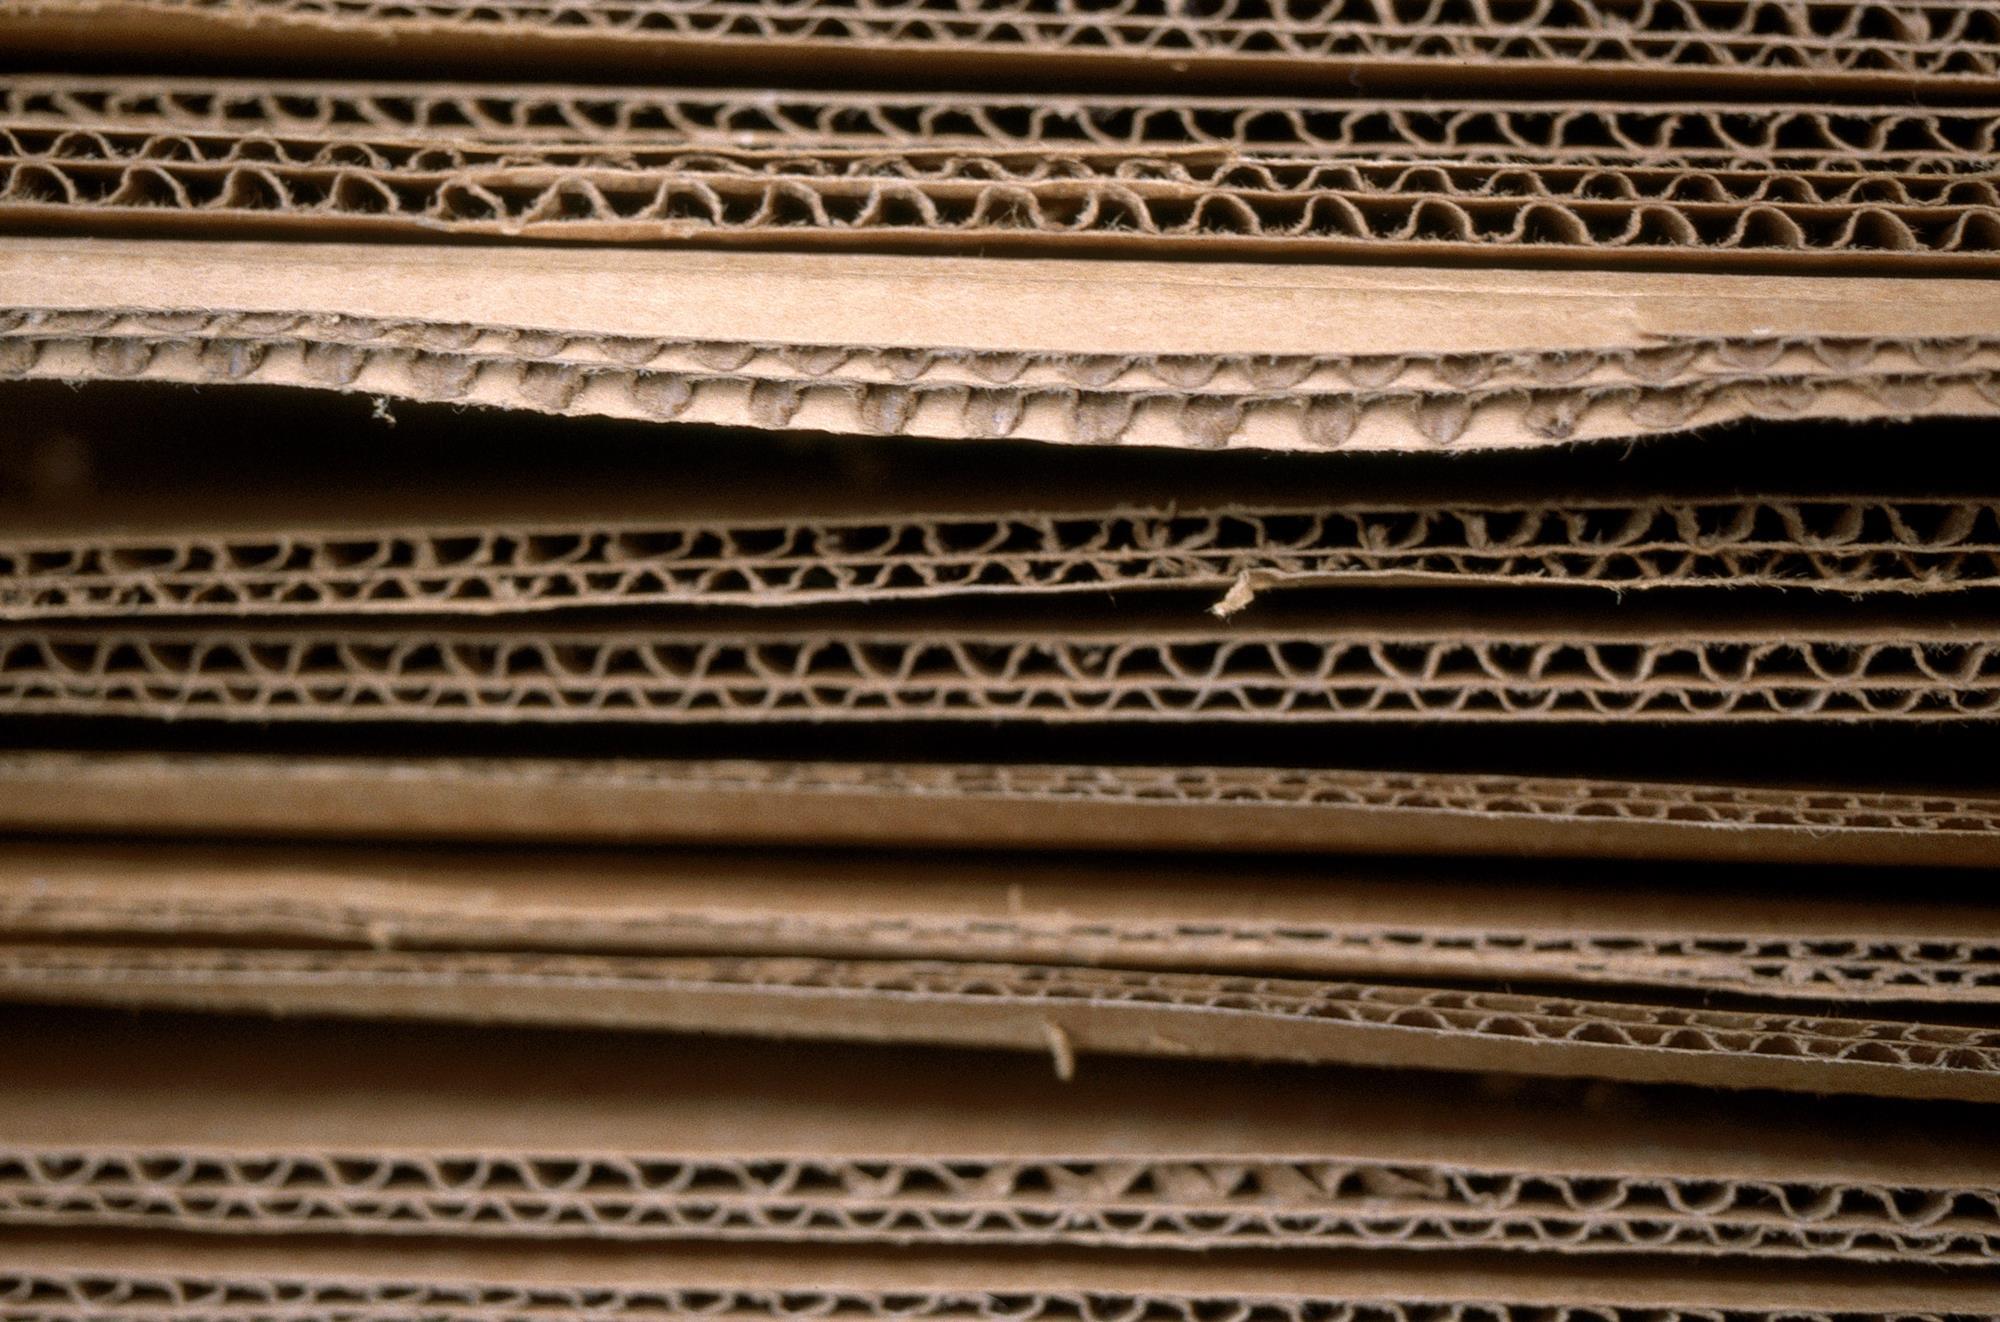 Demand grows for paperboard, with some barriers along the way